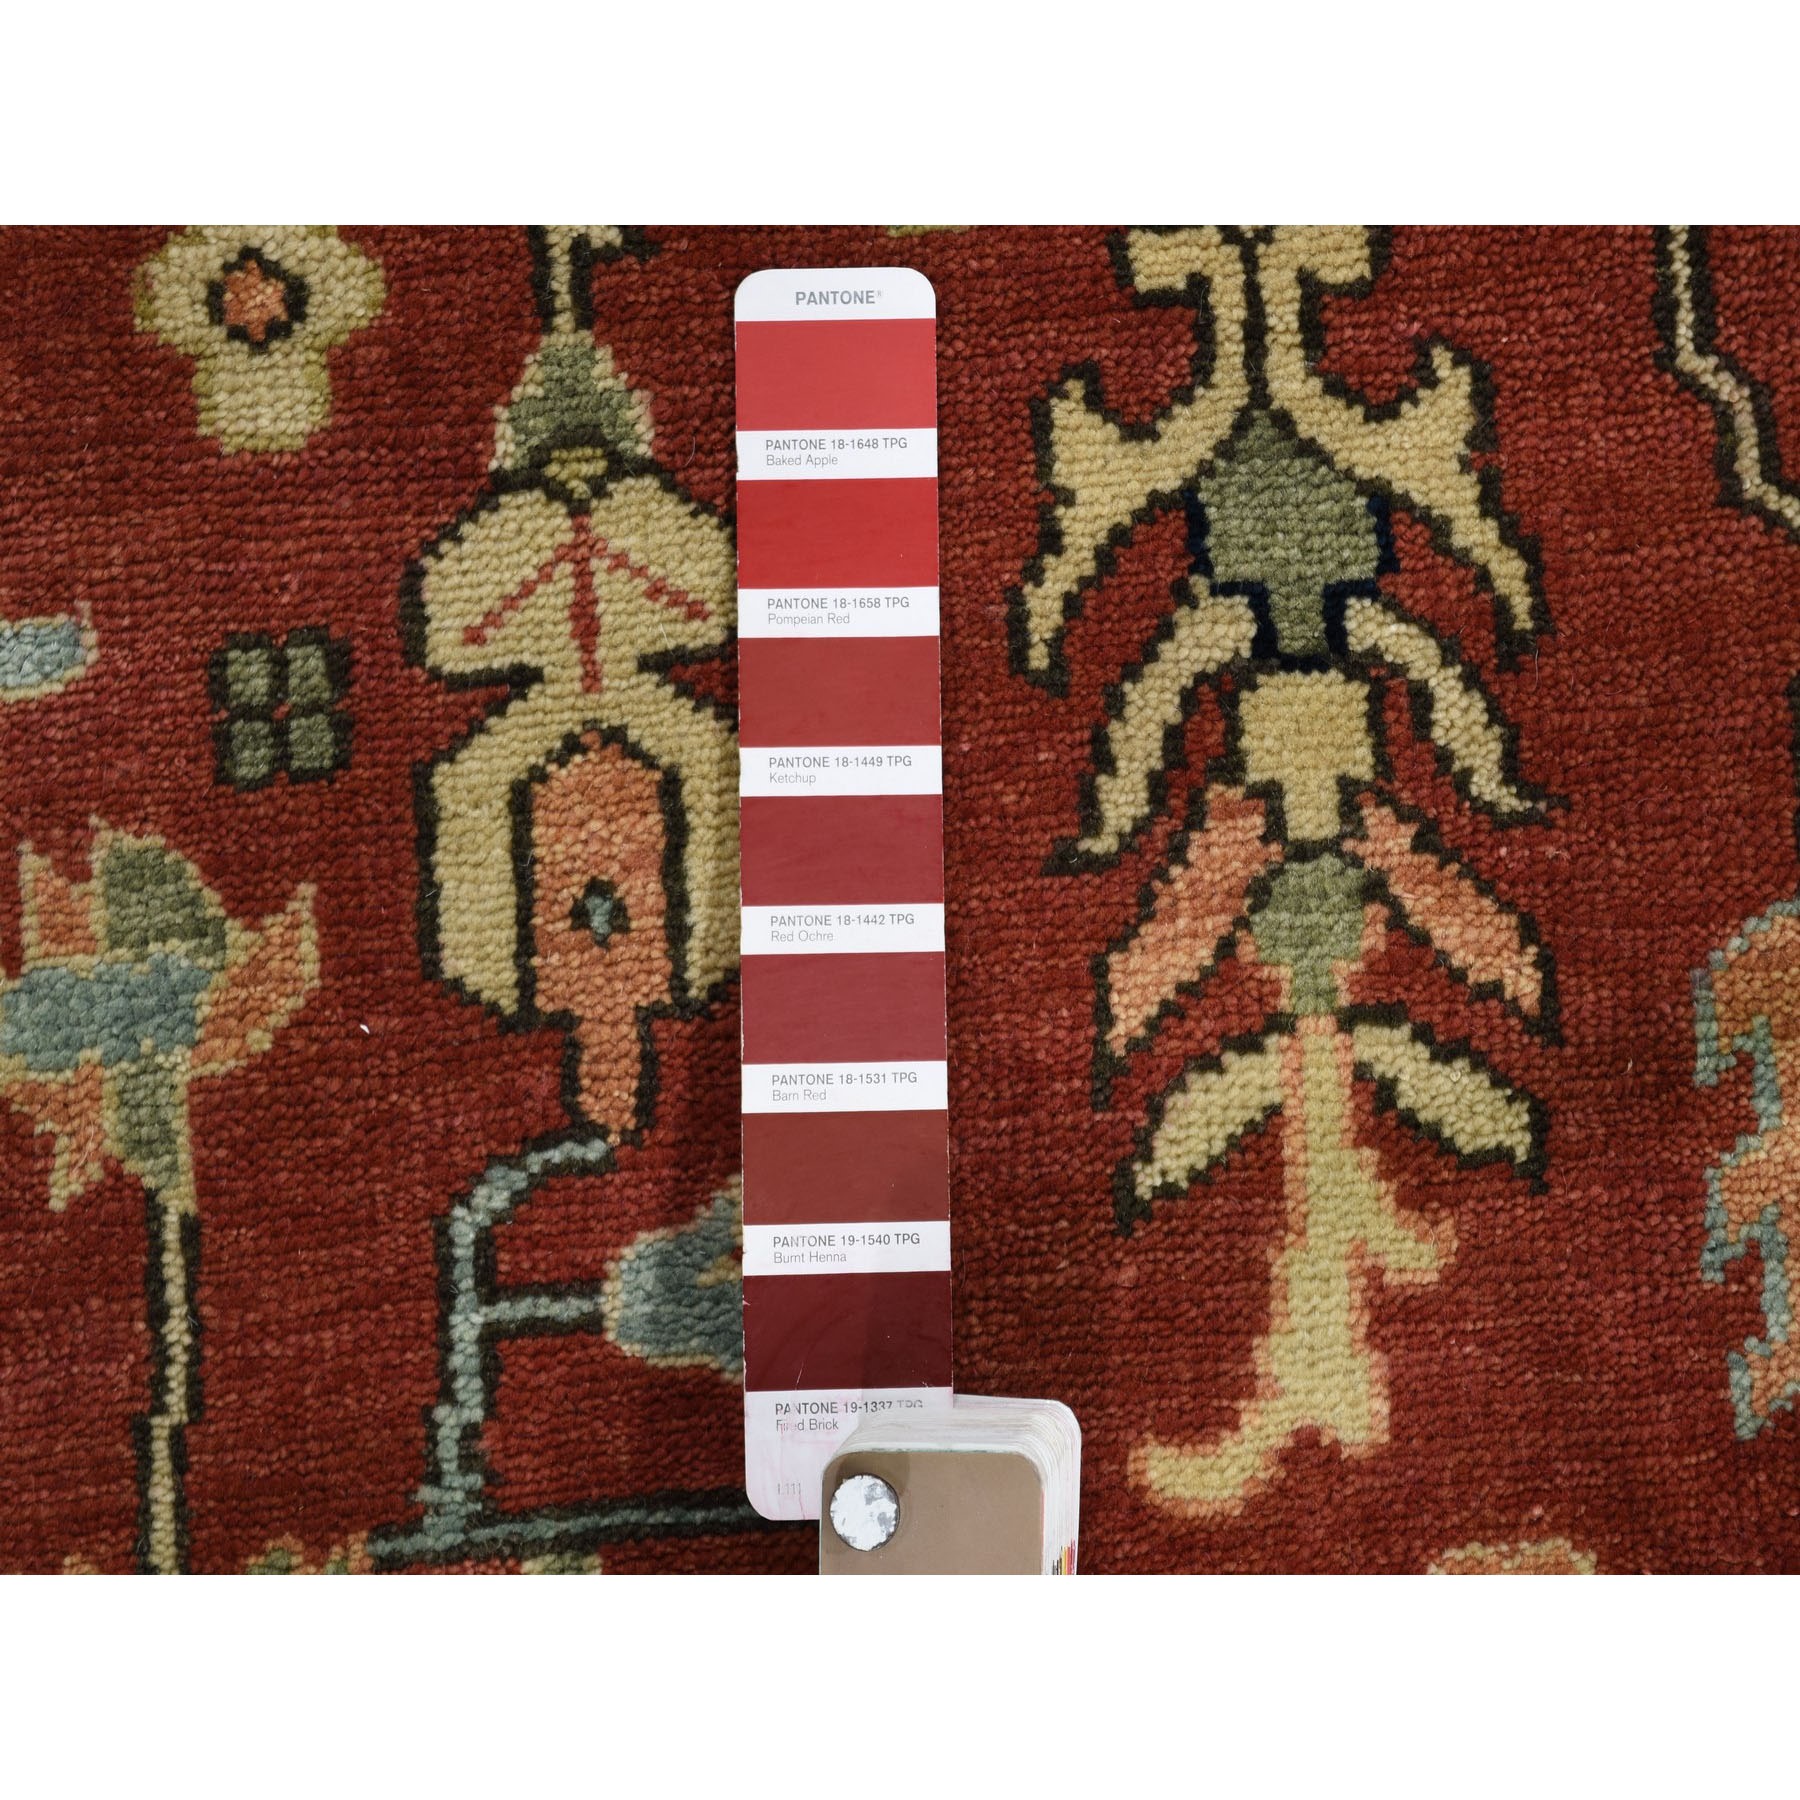 8-x8- Red Heriz Revival Pure Wool Hand Knotted Oriental Rug 